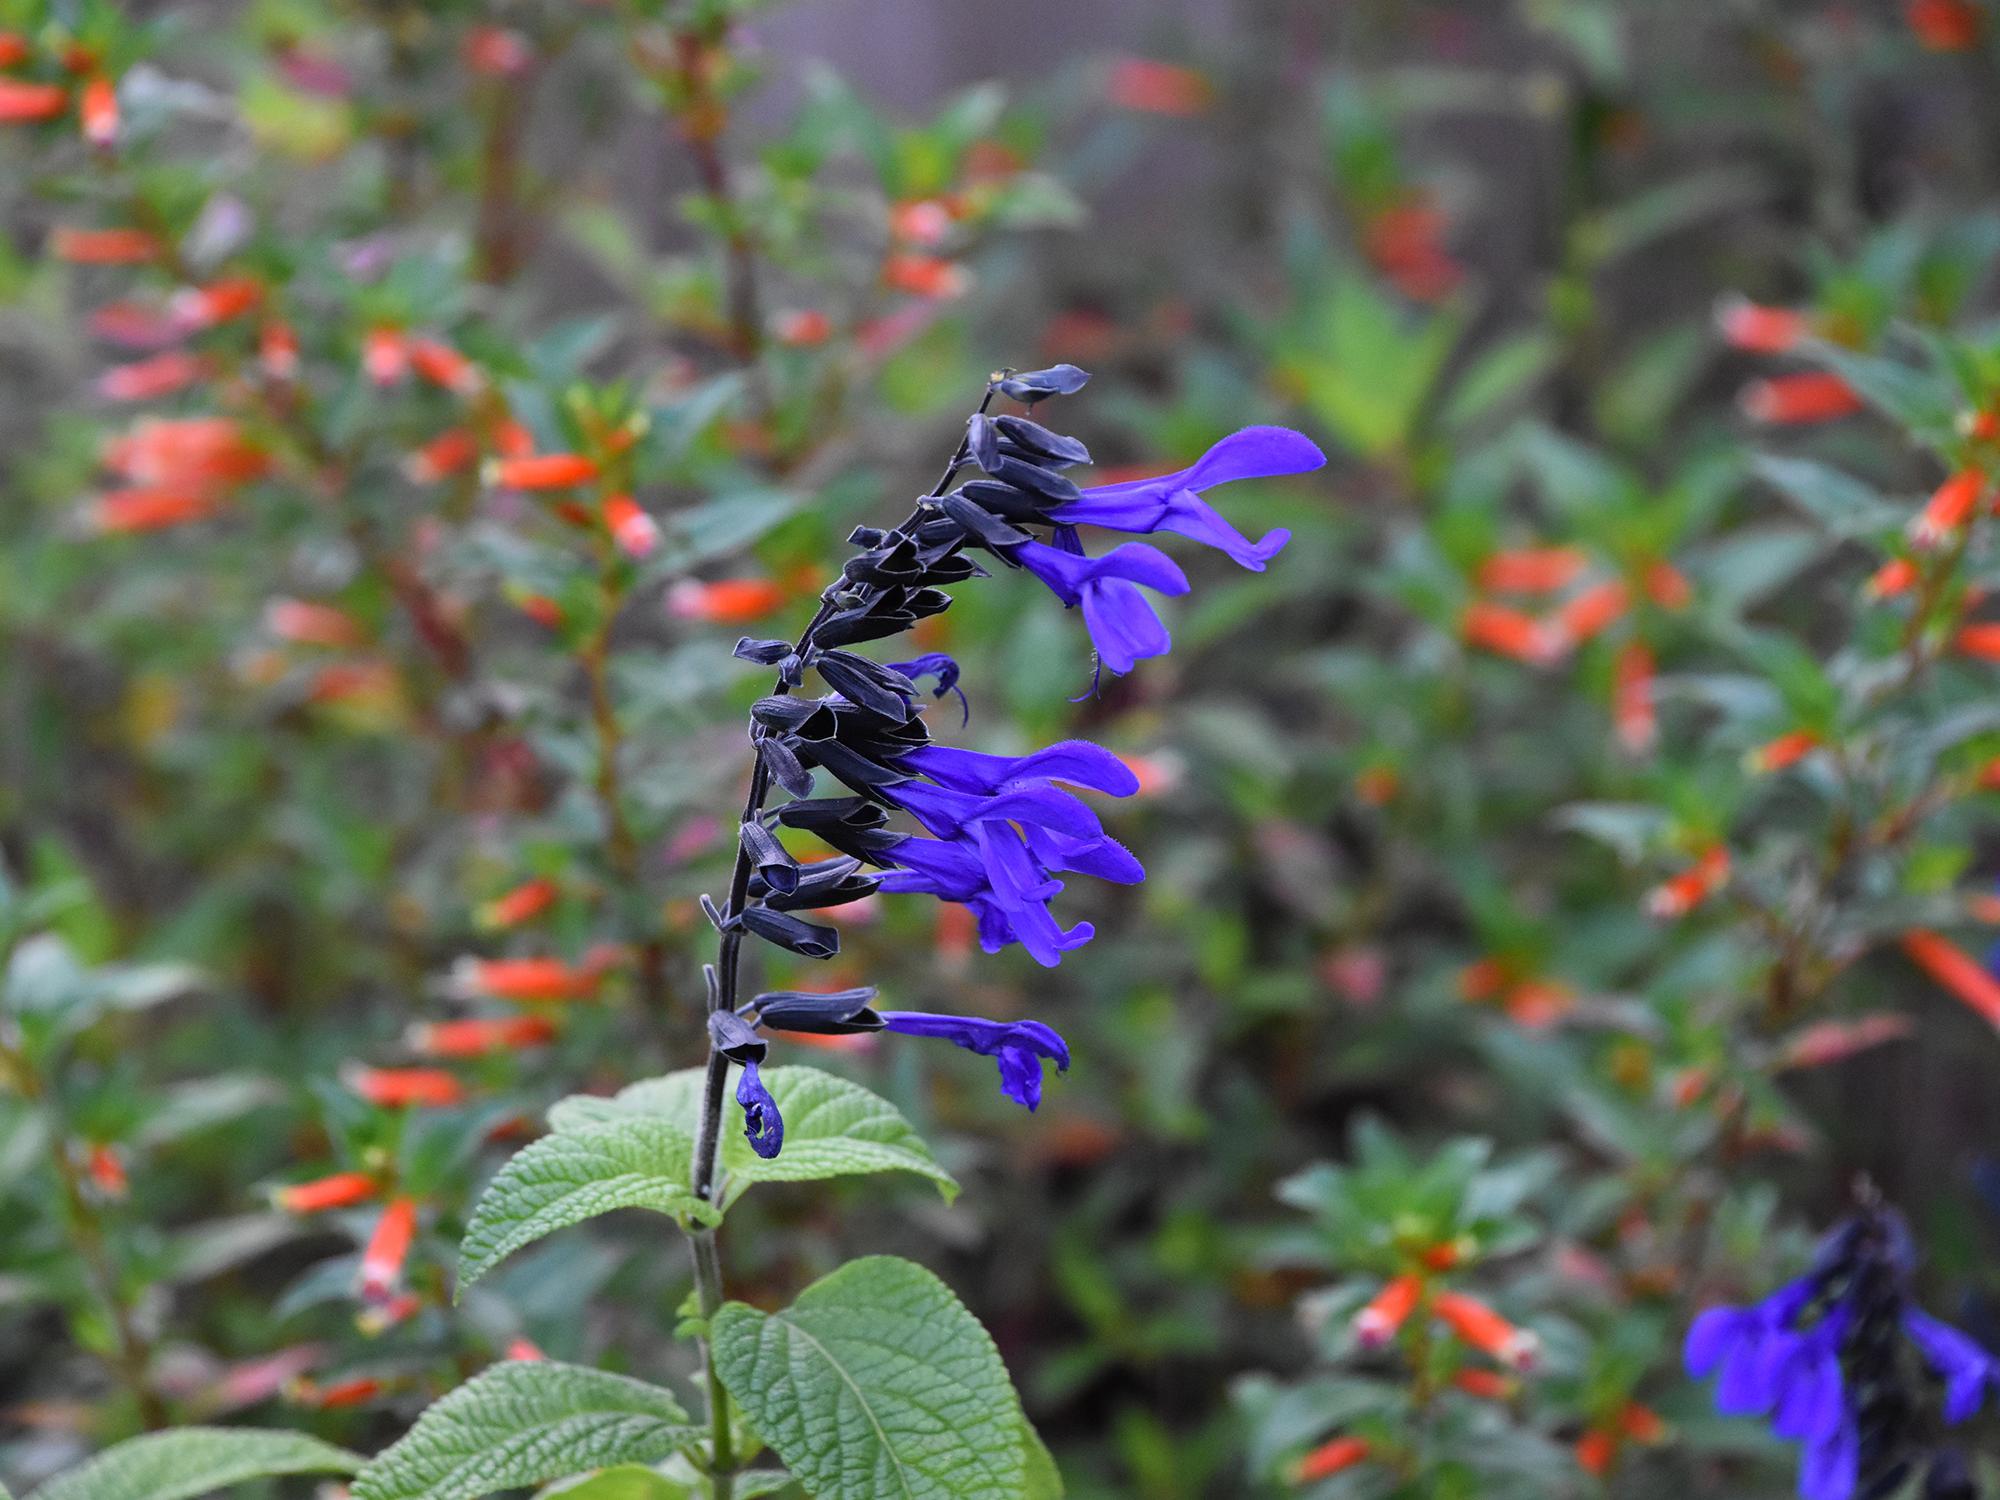 Several deep blue flowers line the upright stem of a plant.